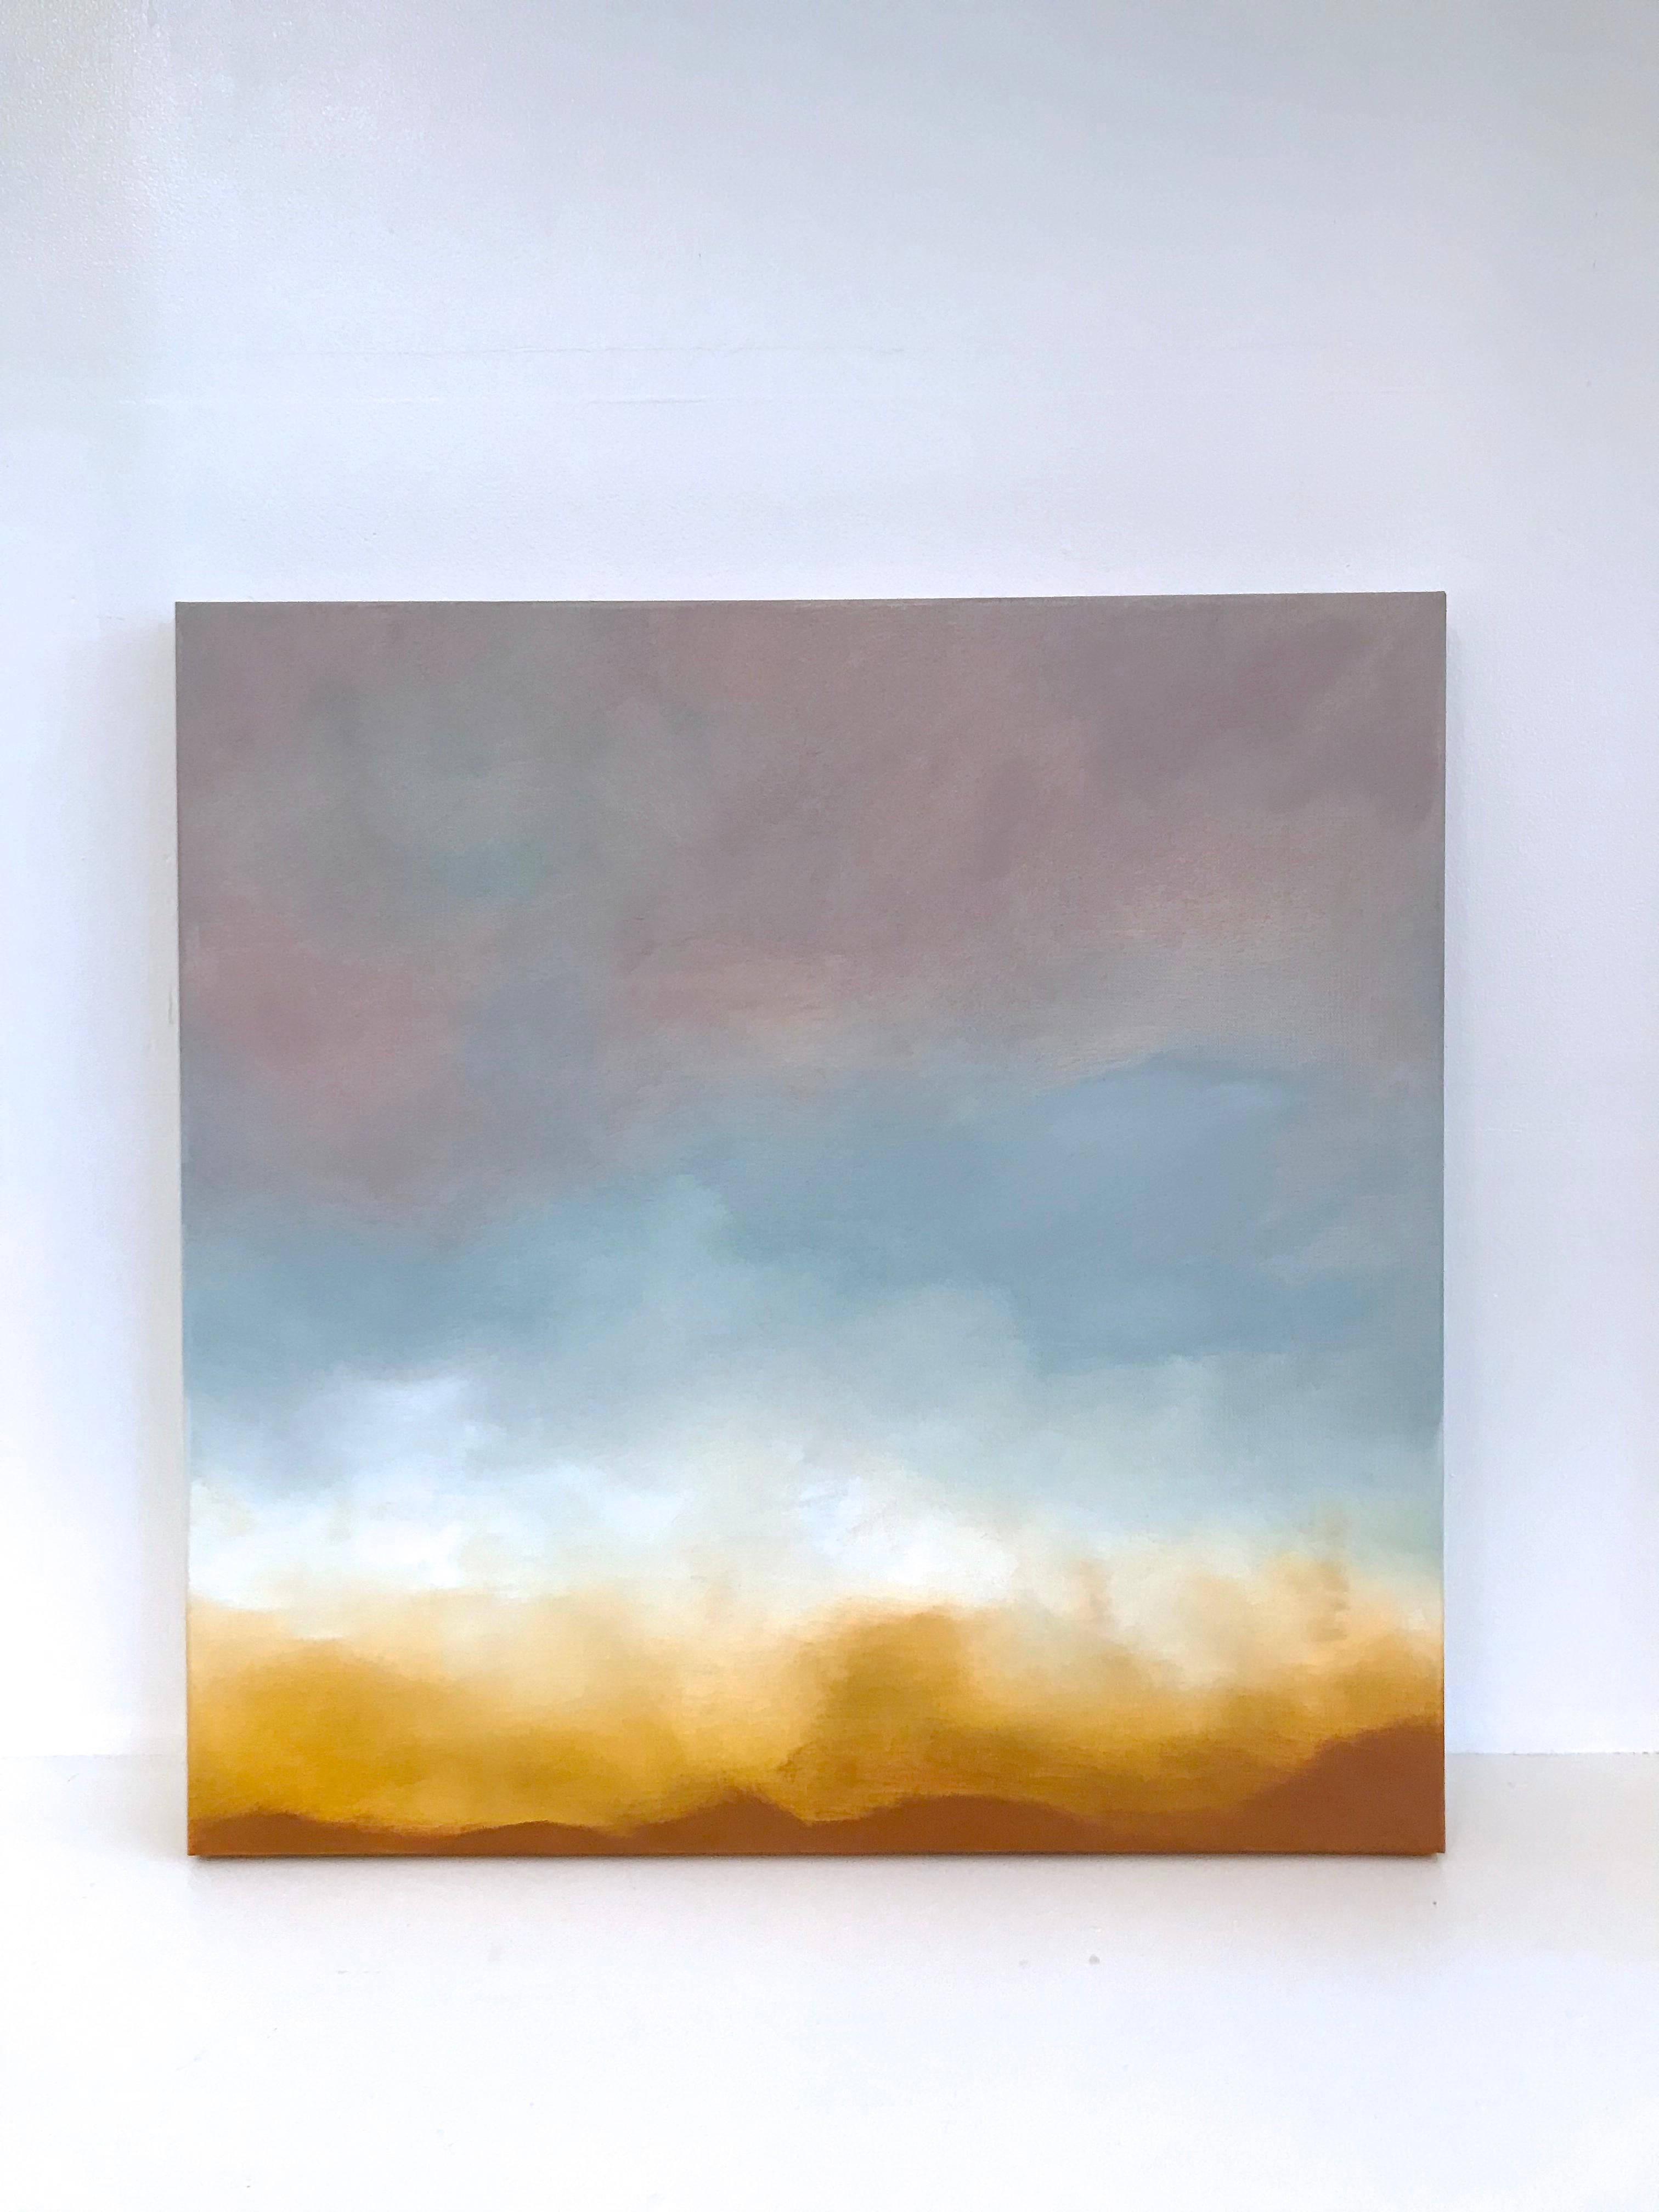 Slow Build - Abstract Painting by Sarah Parsons